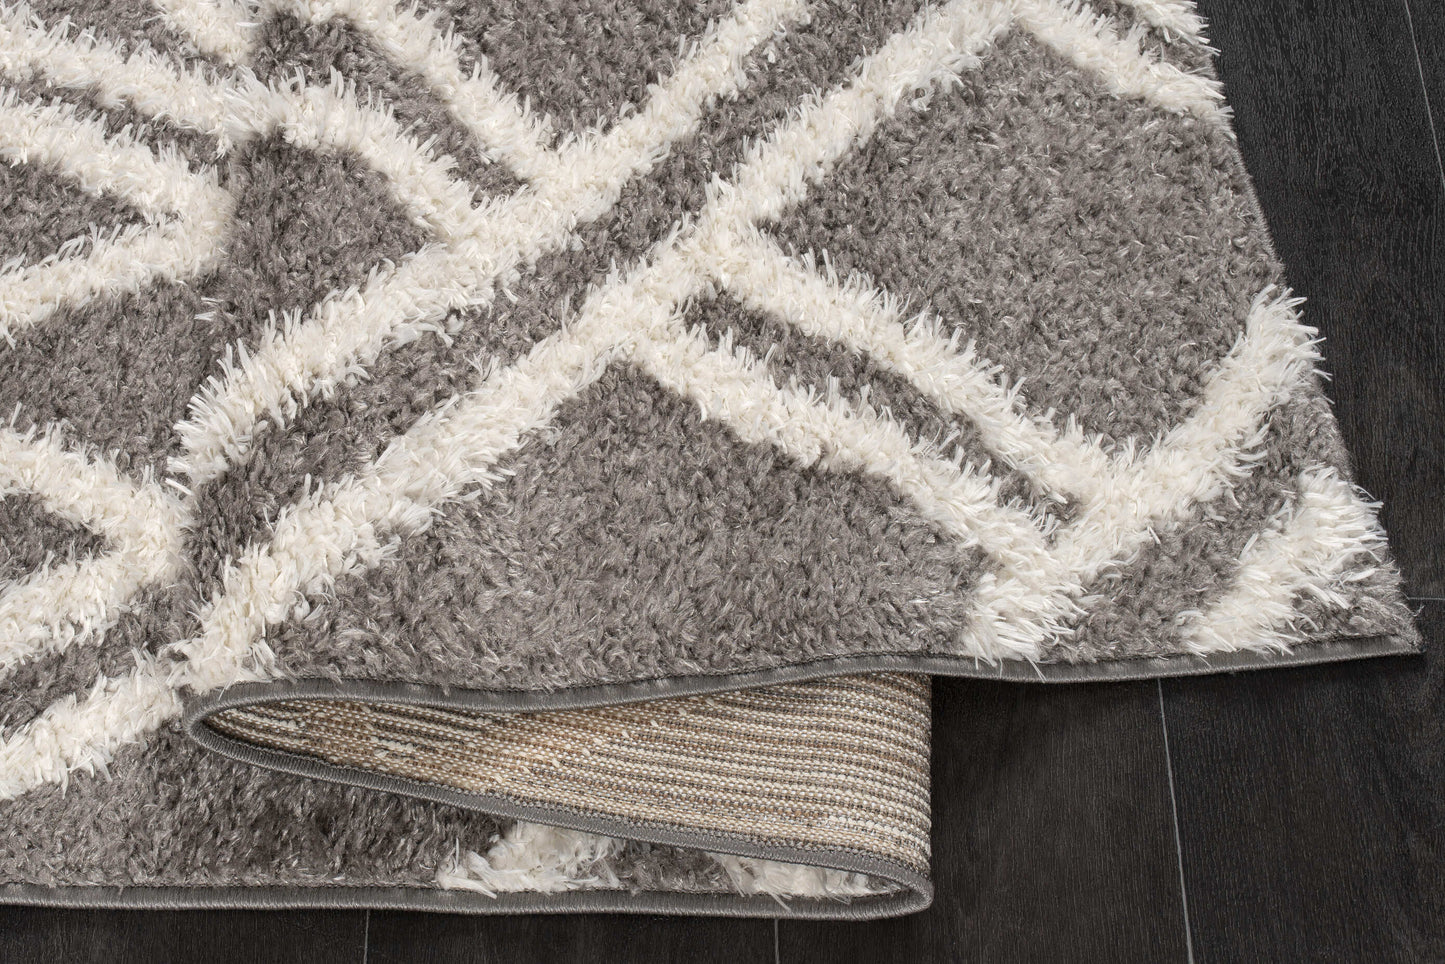 grey off white abstract fluffy shaggy area rug for living room bedroom 2x8, 3x10, 2x10 ft Long Runner Rug, Hallway, Balcony, Entry Way, Kitchen, Stairs